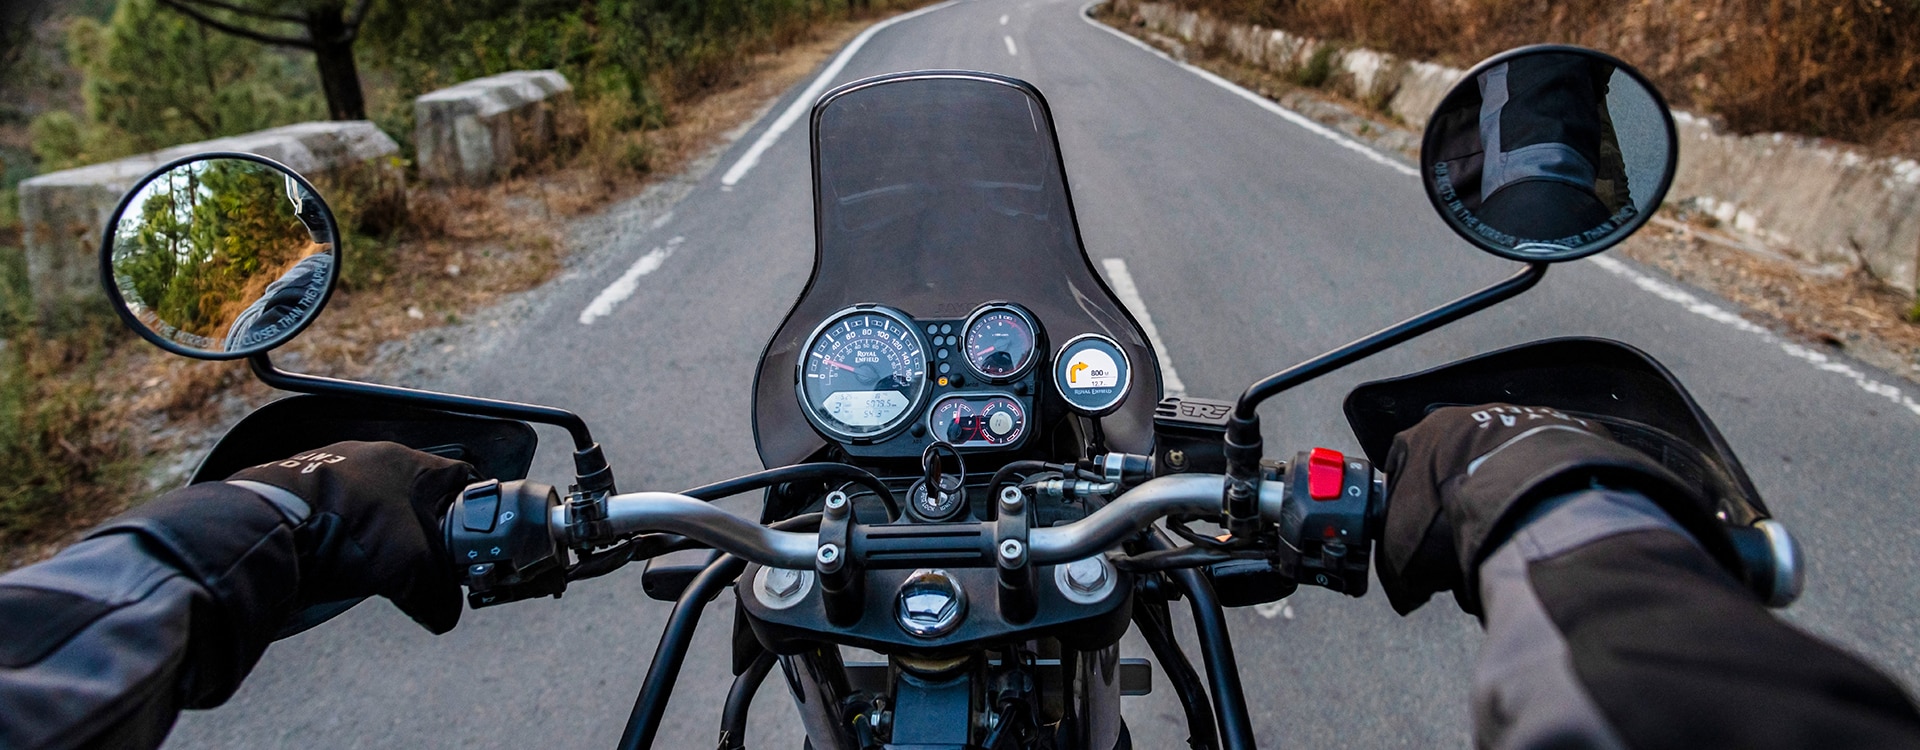 Royal Enfield Himalayan with Tripper navigation system